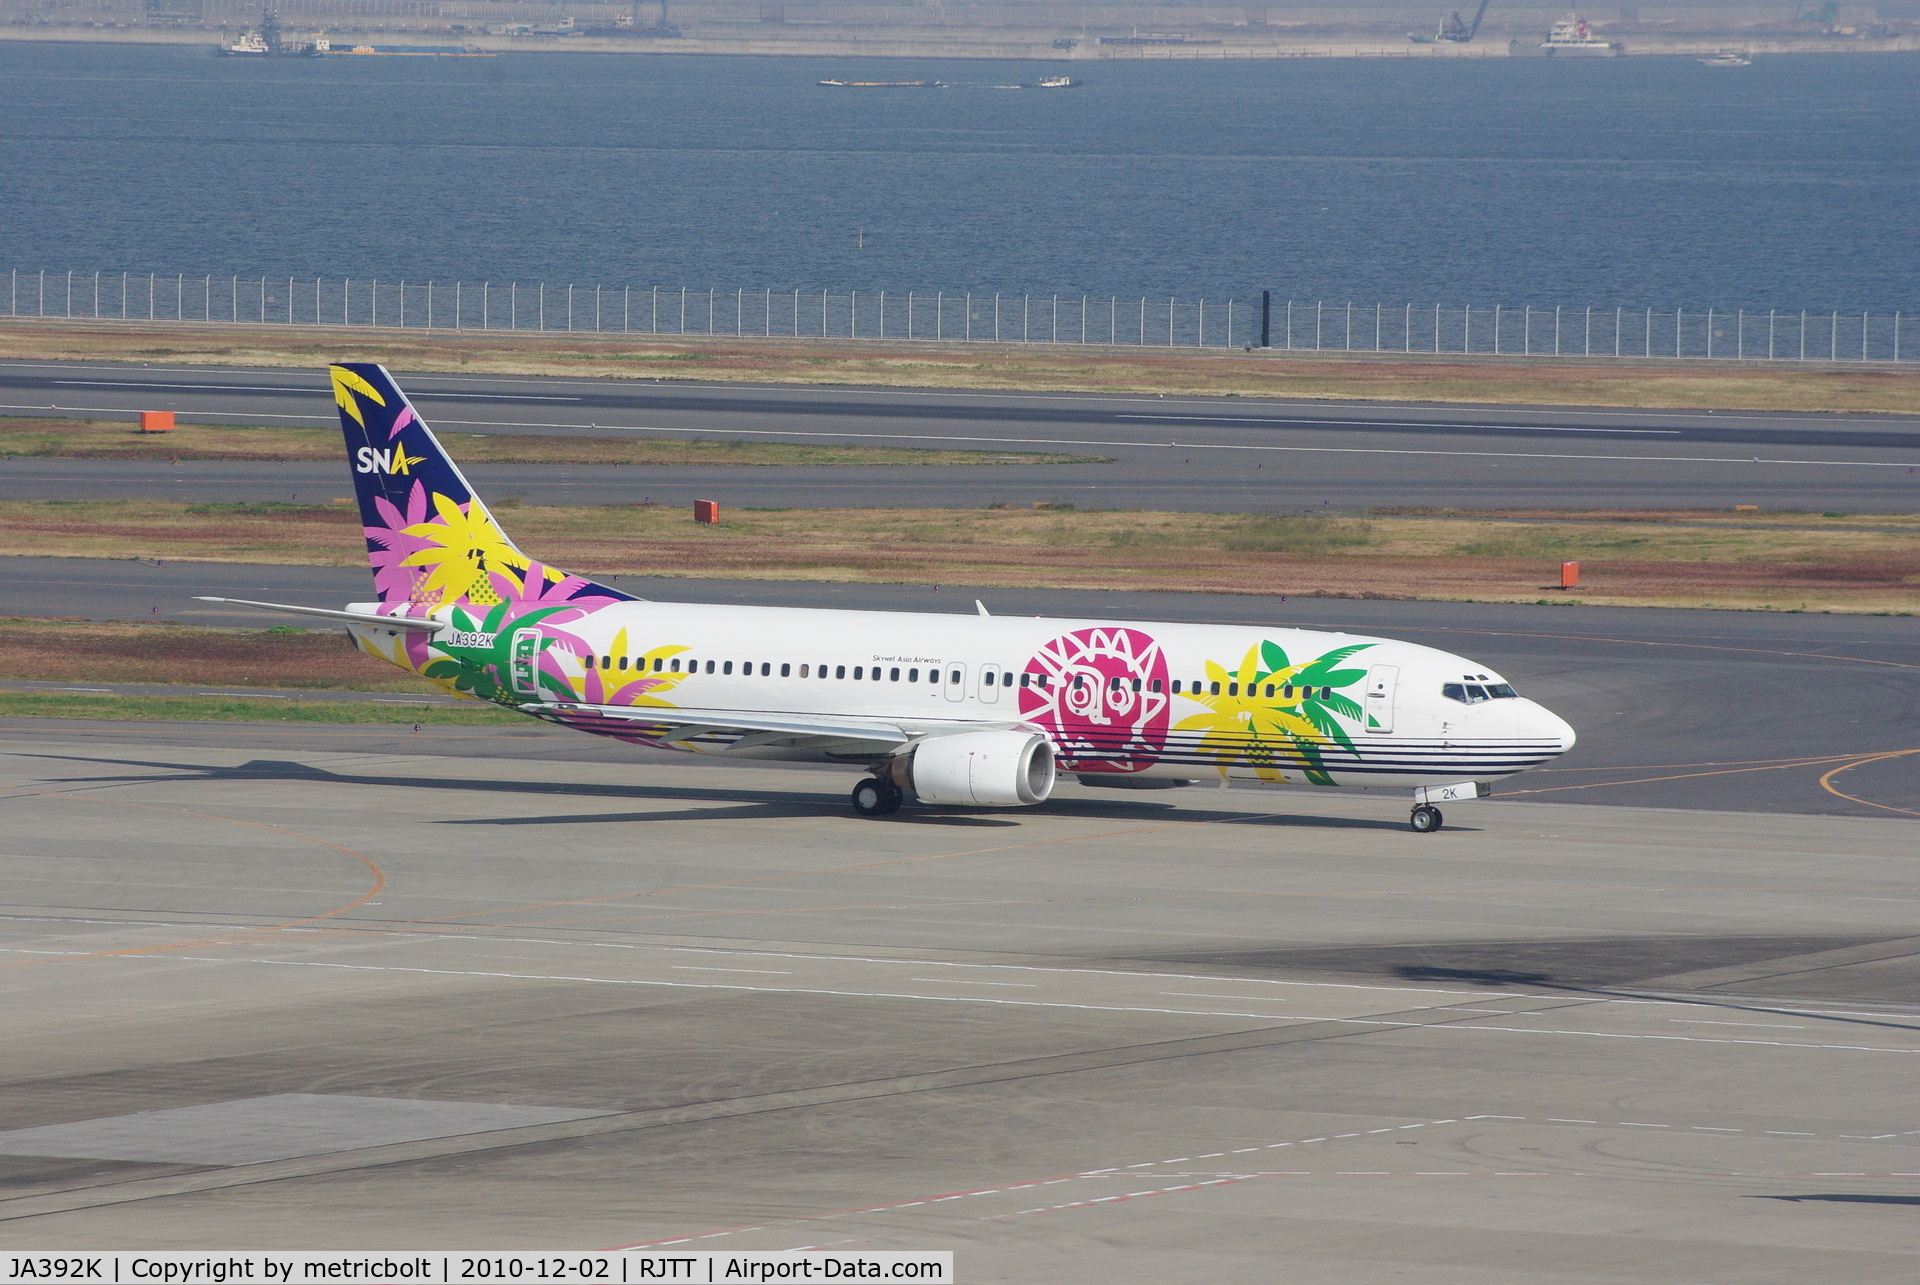 JA392K, 1997 Boeing 737-46M C/N 28550, in its latest guise